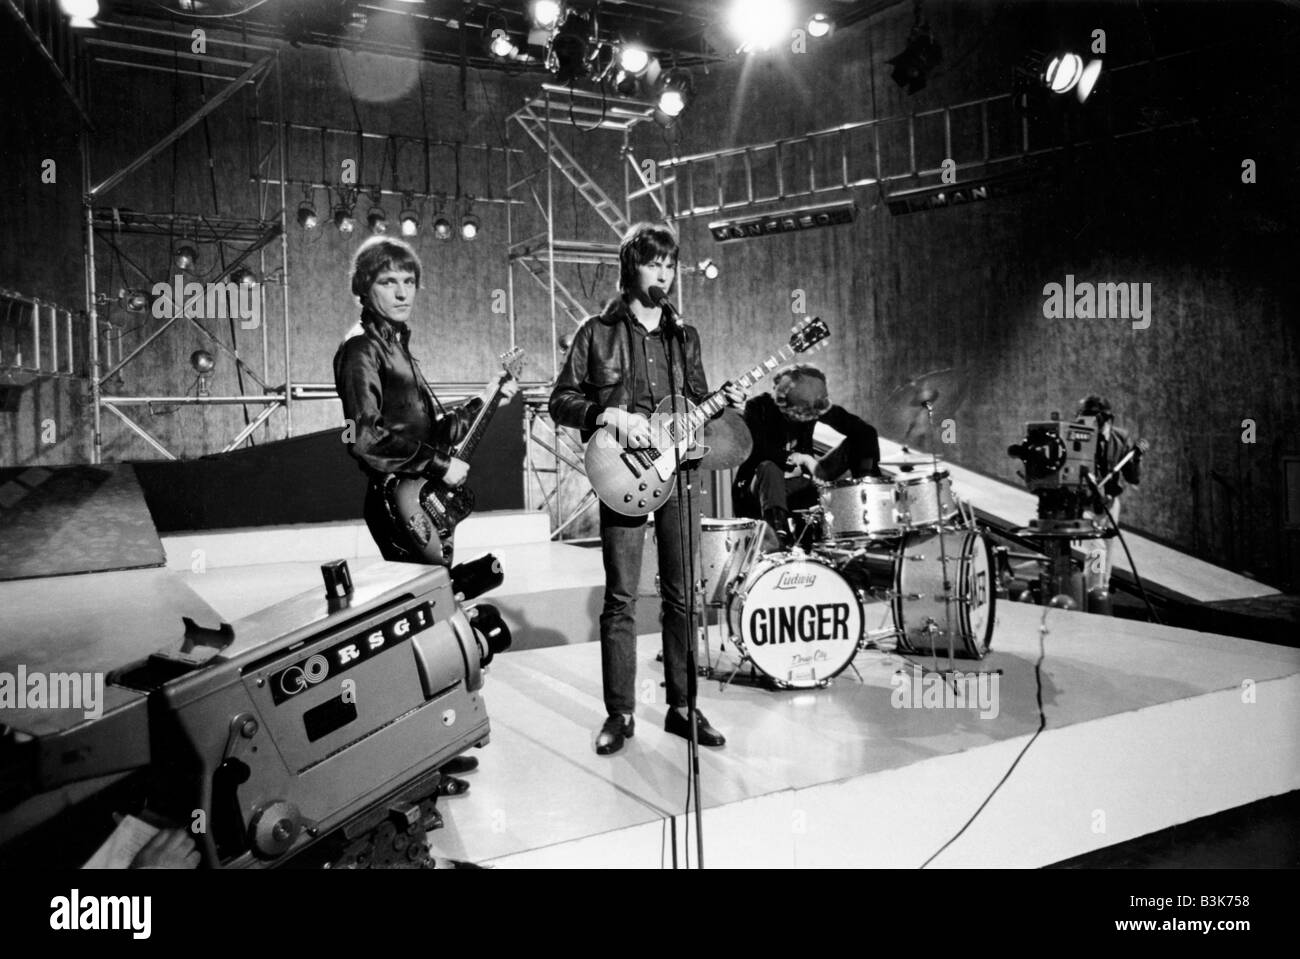 Cream Uk Group On Tv S Ready Steady Go In 1967 From L Jack Bruce Eric Clapton And Ginger Baker On Drums Photo Tony Gale Stock Photo Alamy